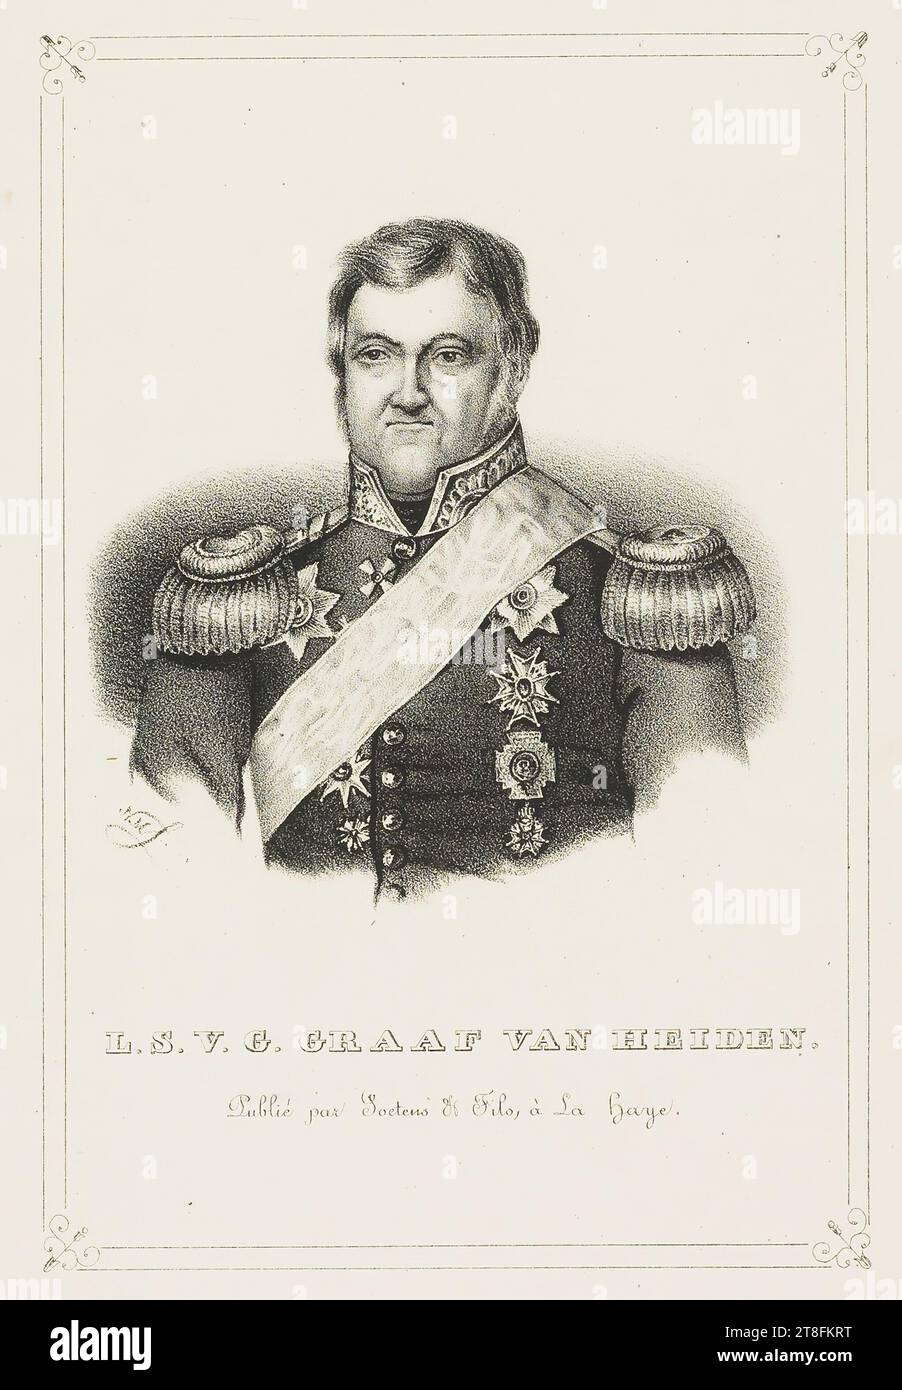 nML. L.S.V.G. COUNT VAN HEIDEN. Published by Soetens & Sons, The Hague. illustration from: Portraits of famous persons in the history of discovery Stock Photo